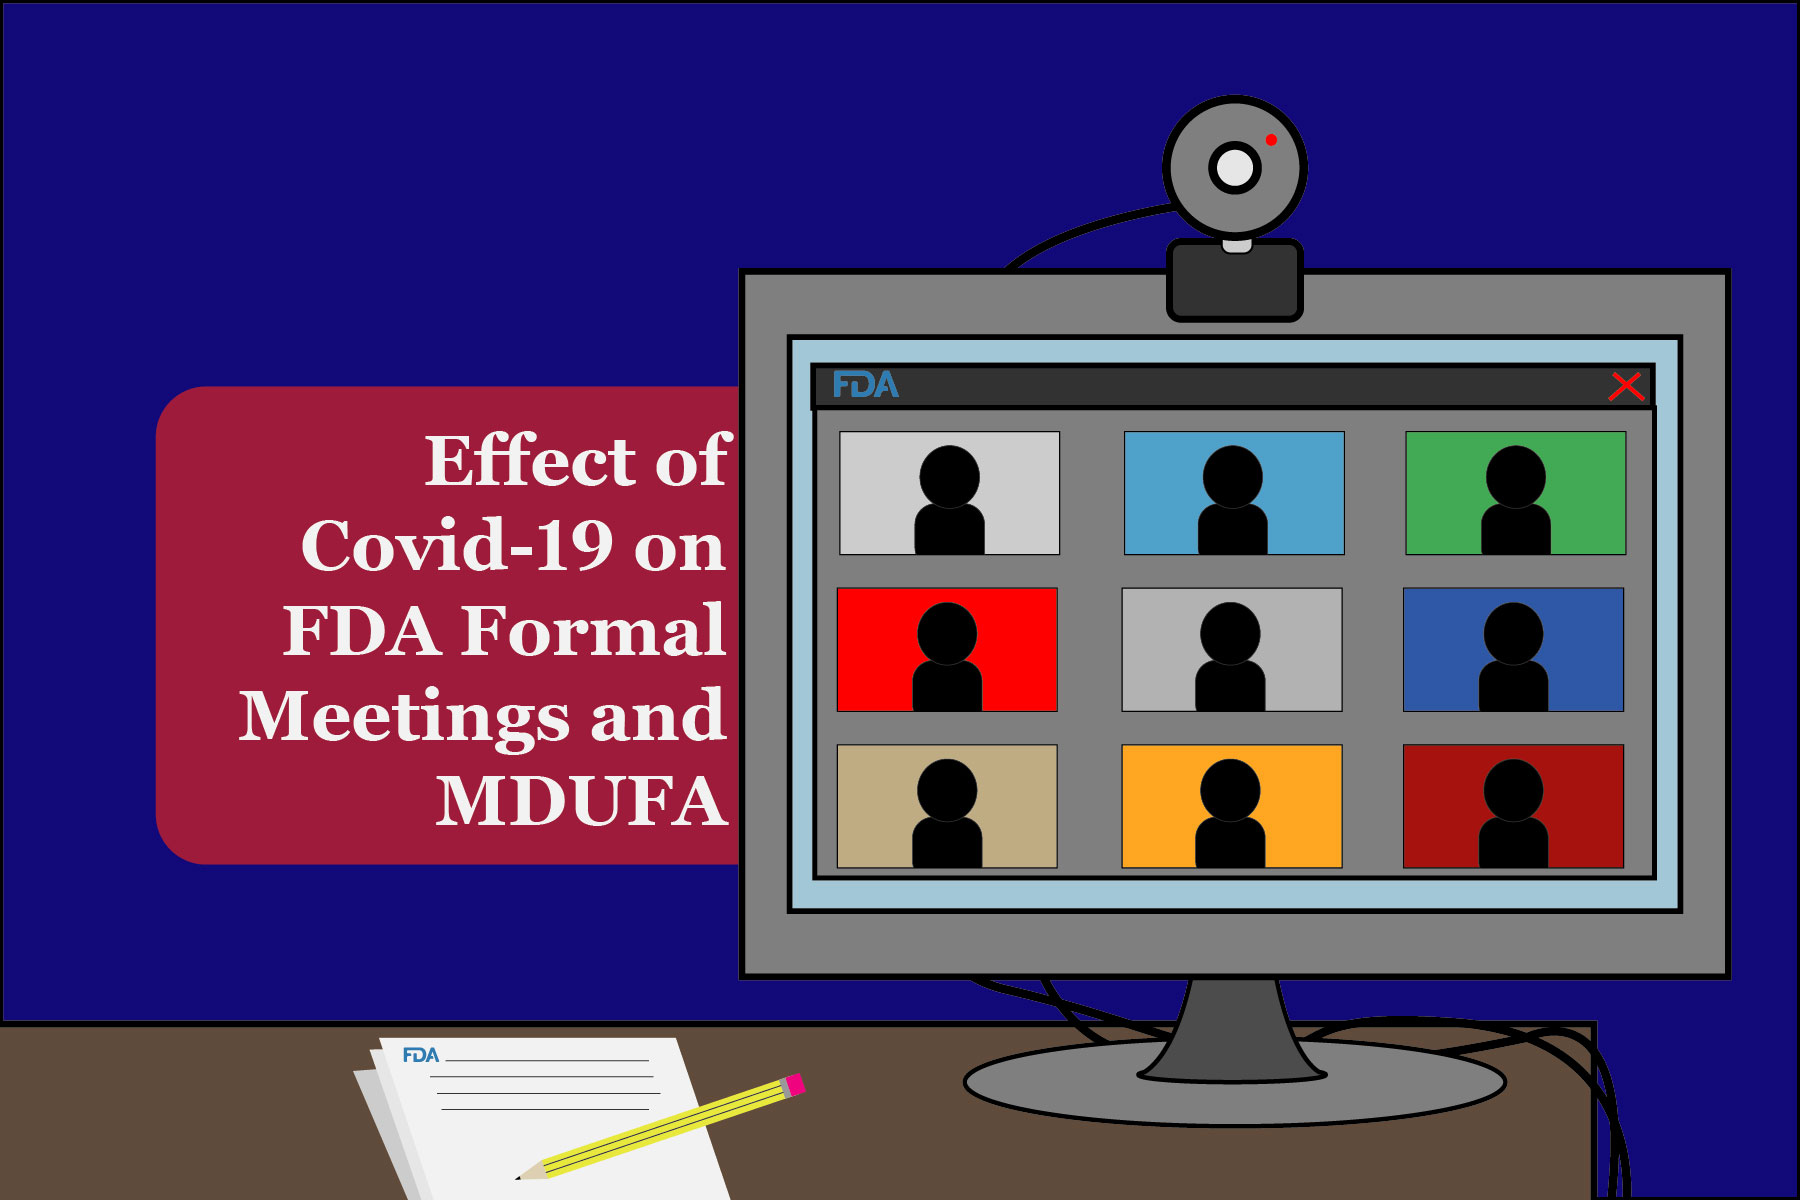 formal FDA meetings and MDUFA being done virtual due to COVID-19